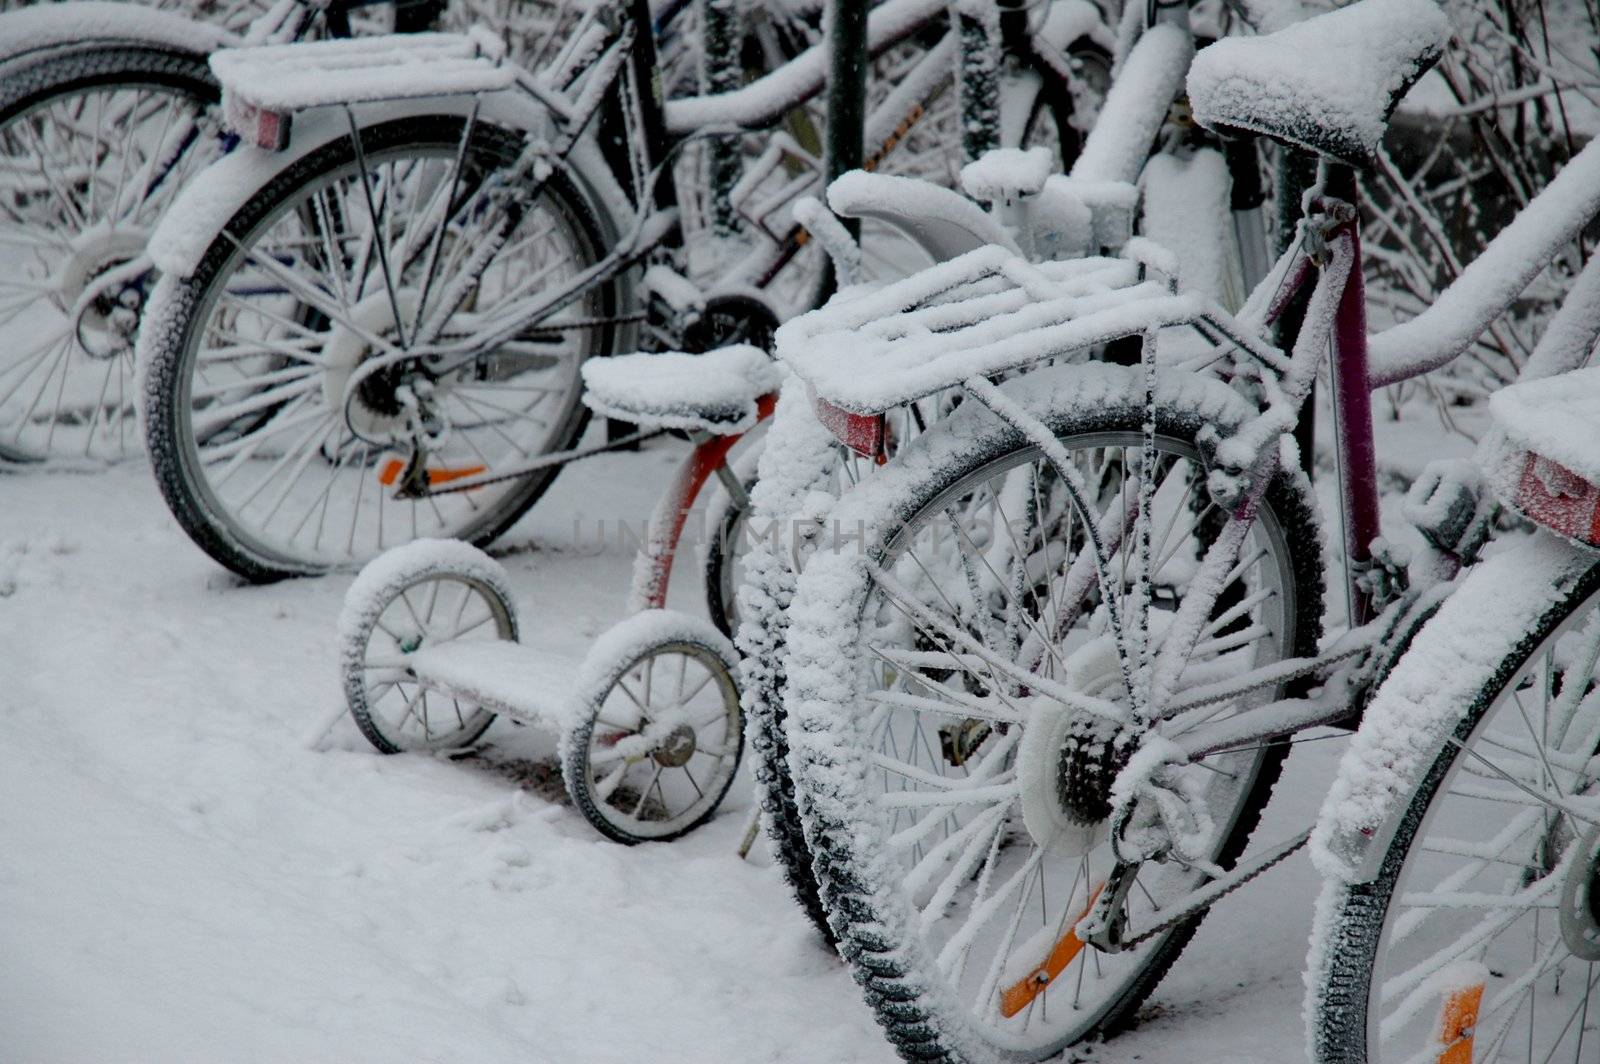 Bicycles in snow by Alenmax